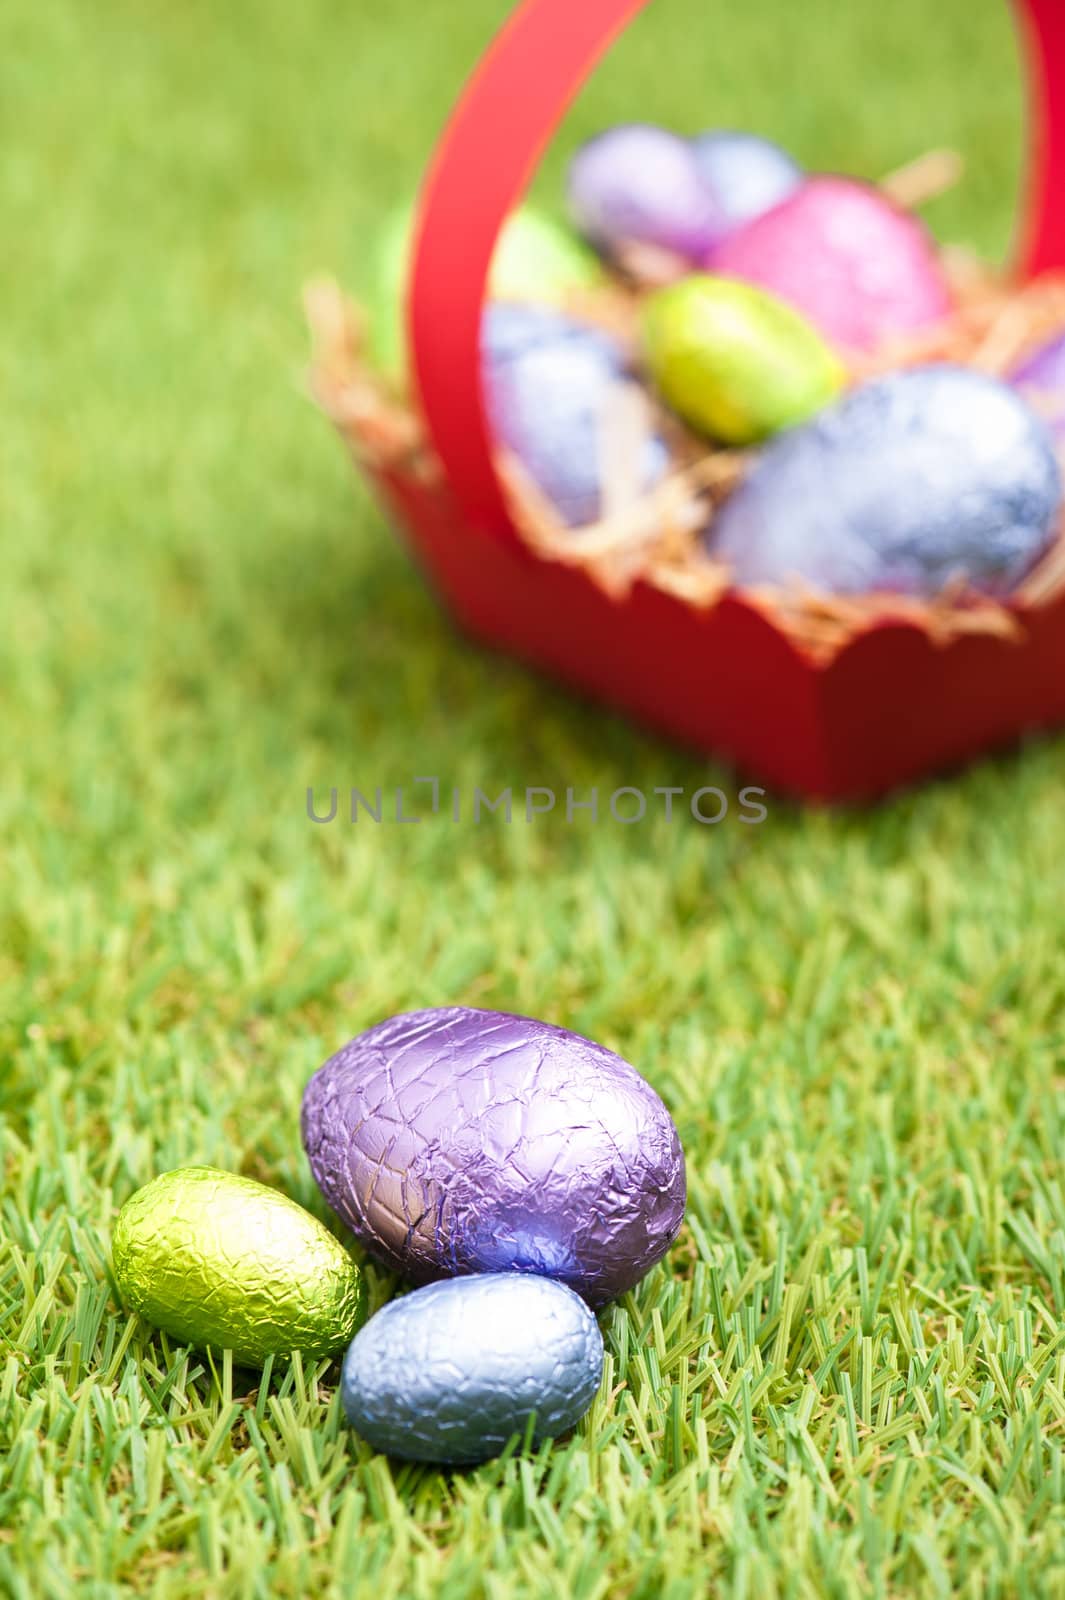 Red basket with Chocolate Easter eggs in an outdoor setting